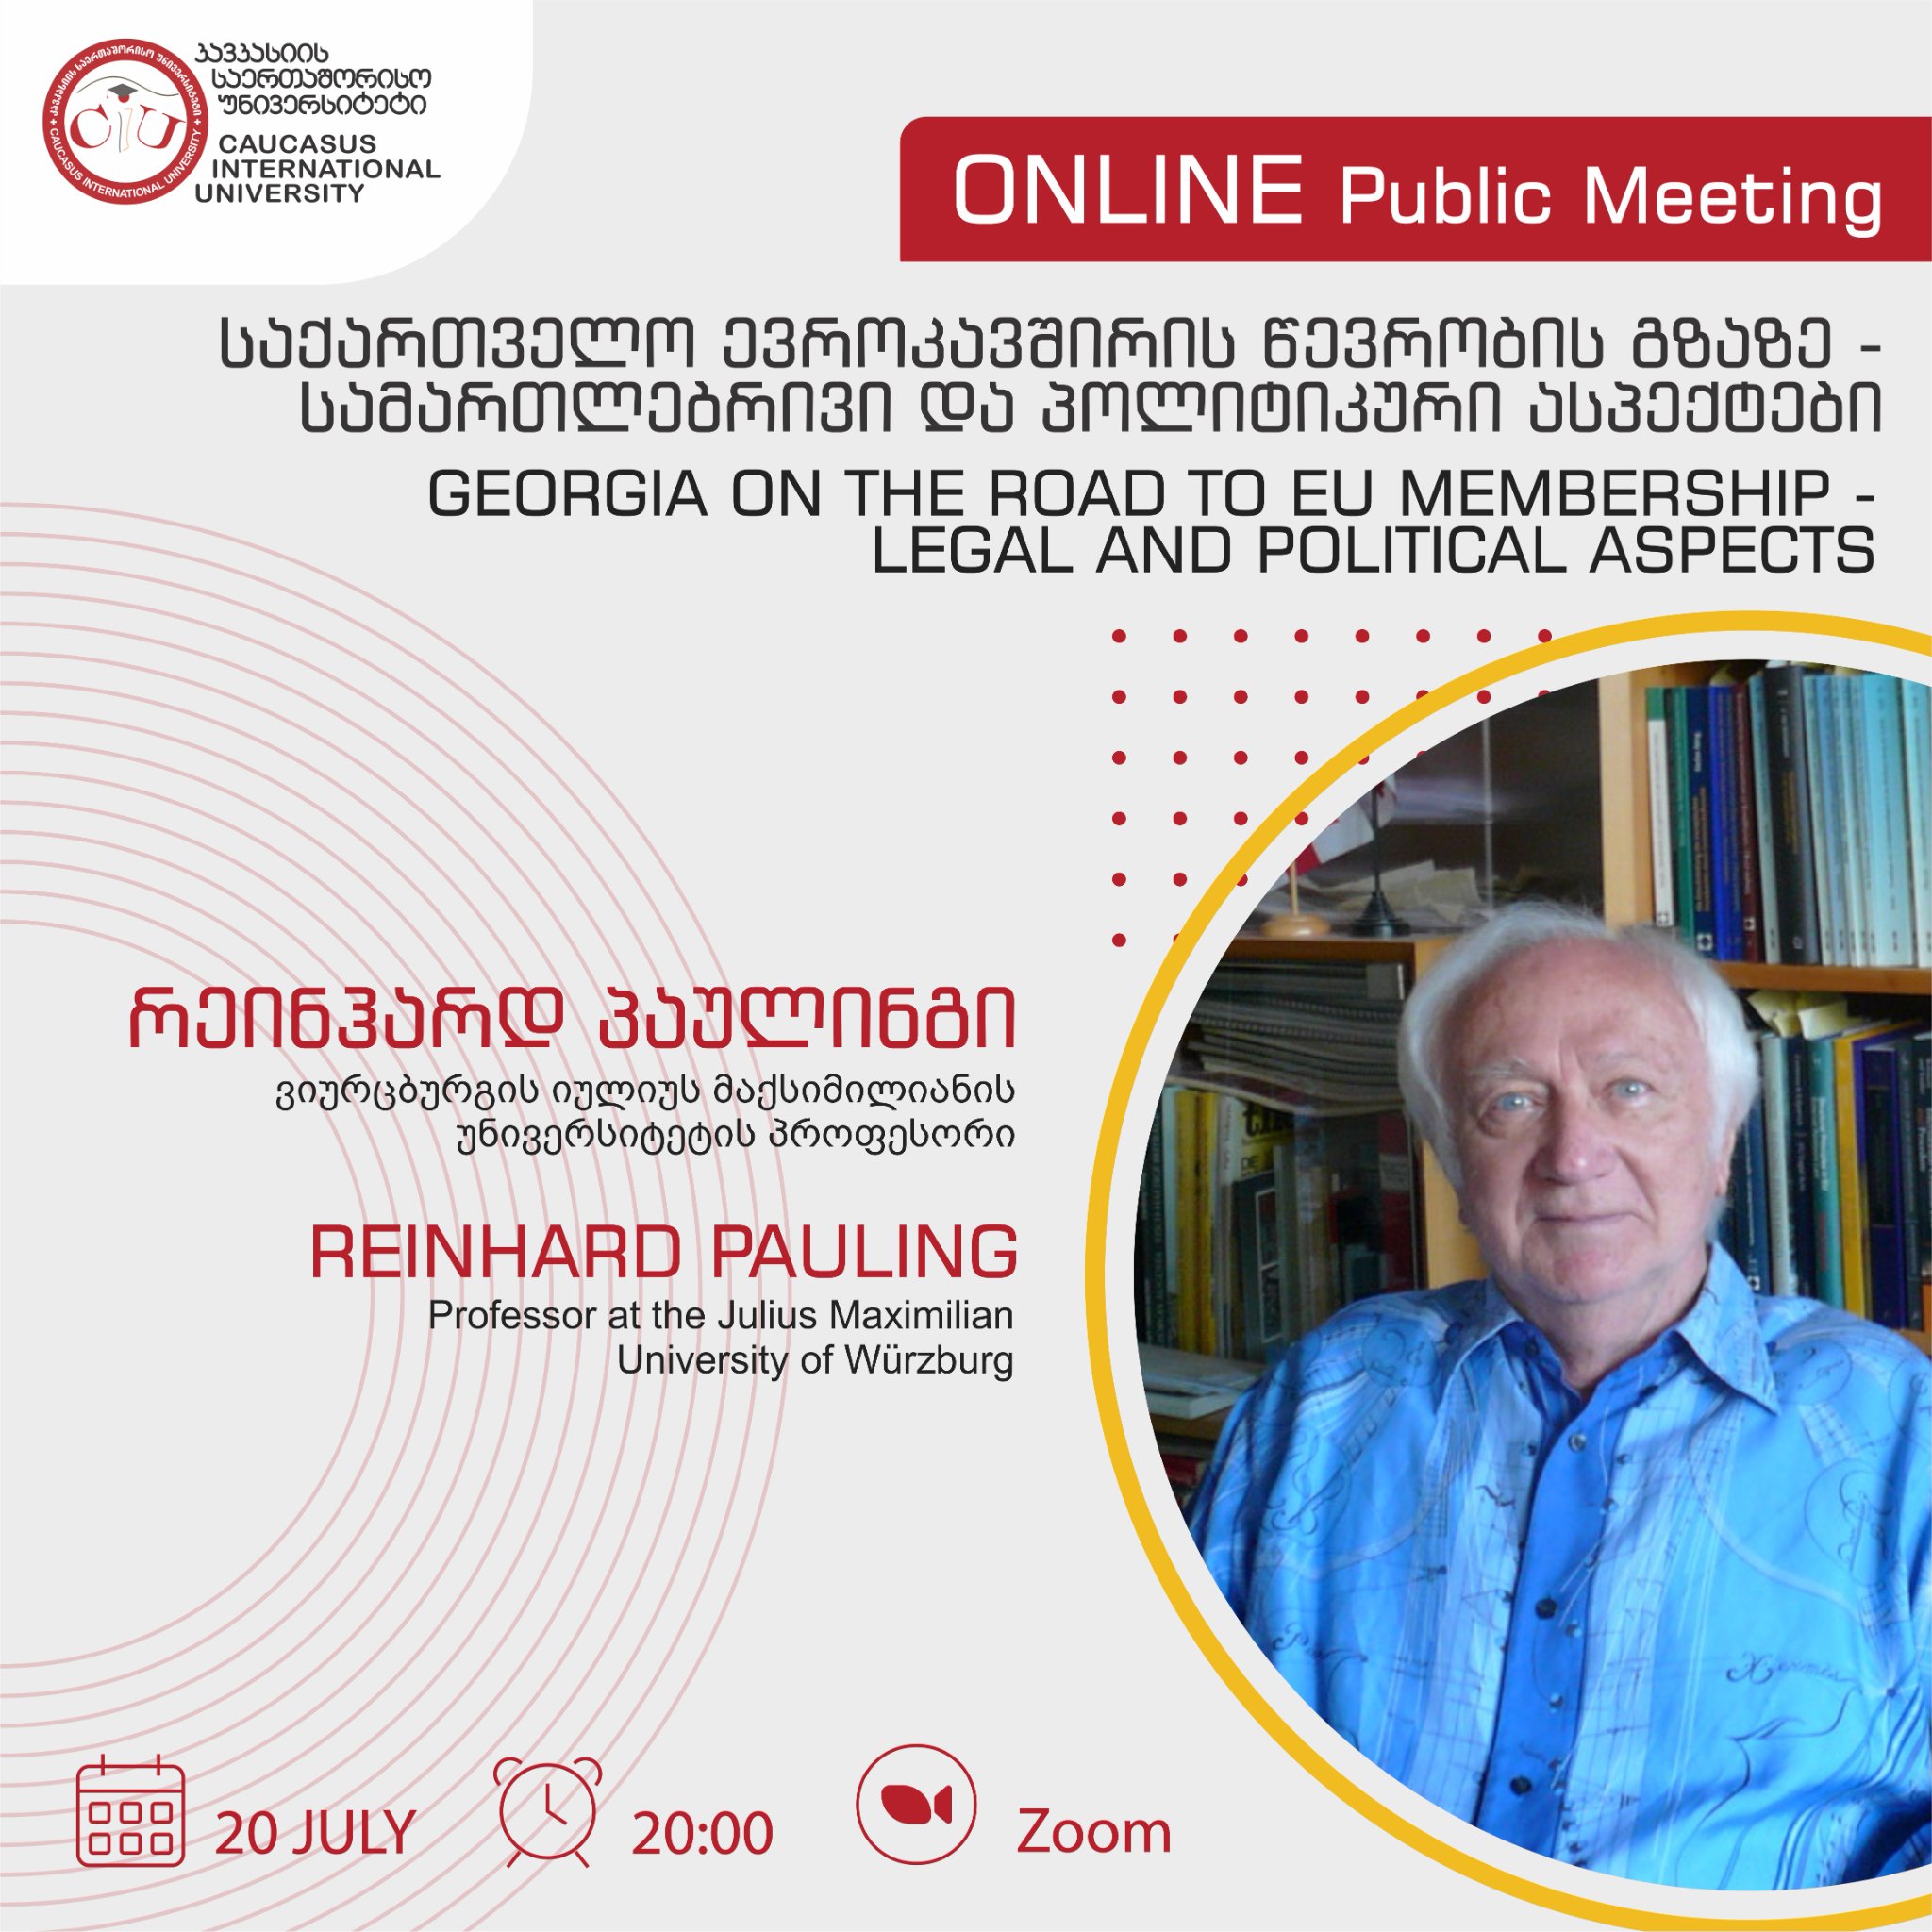 Online Public Lecture on the Topic: “Georgia on the Road to EU Membership - Legal and Political Aspects”